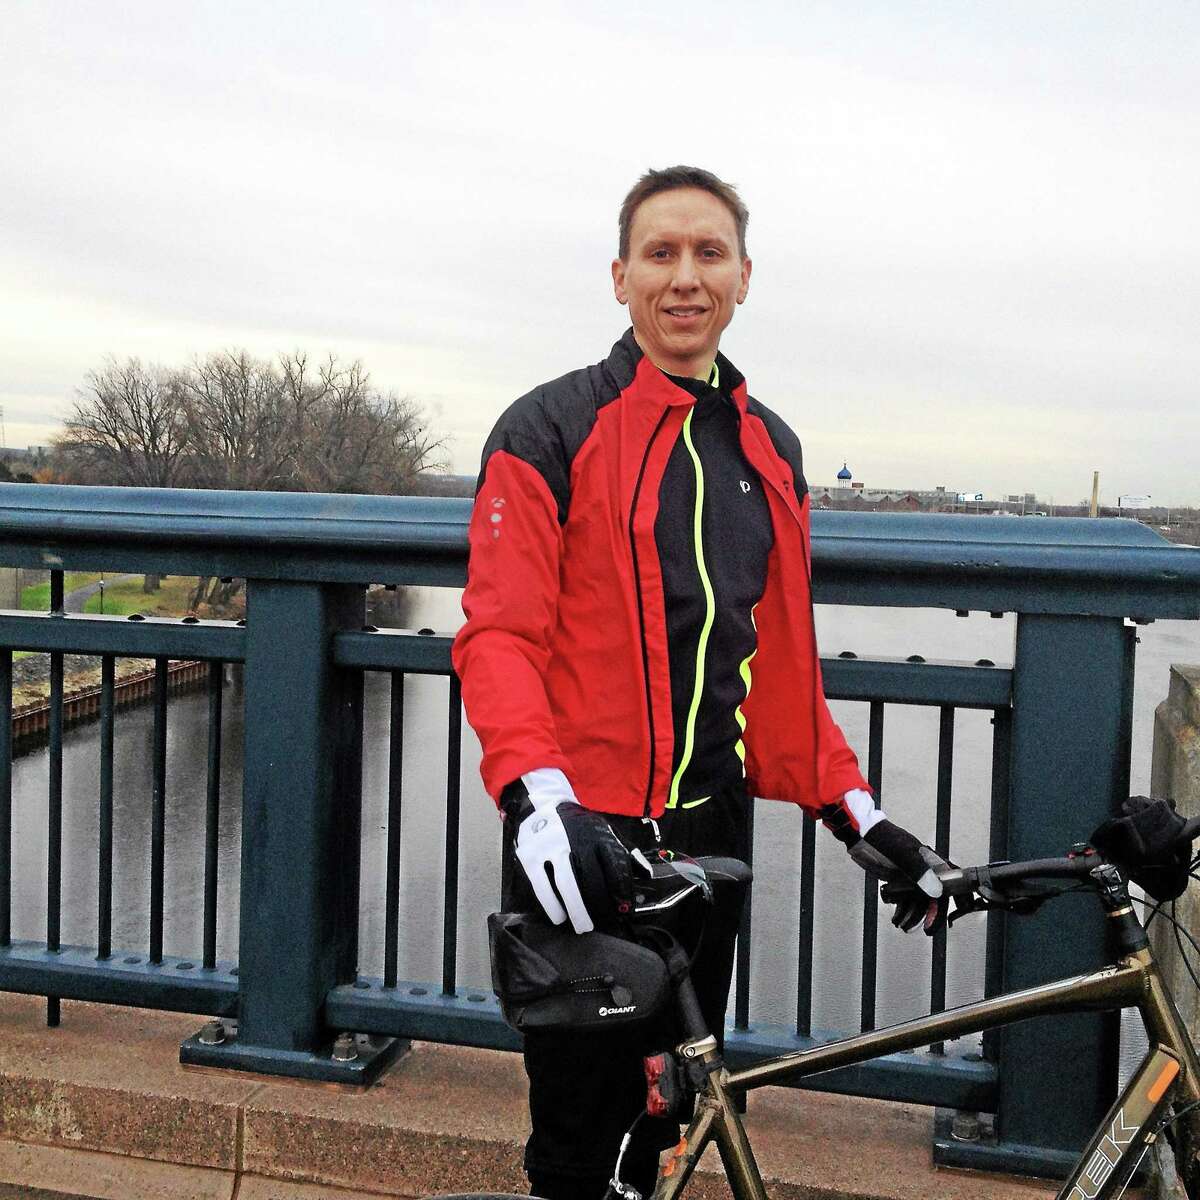 Portland resident Chad Wilson is training now for next June’s Ride to Conquer Cancer, in which athletes cycle from Manhattan to Upstate New York and back again.